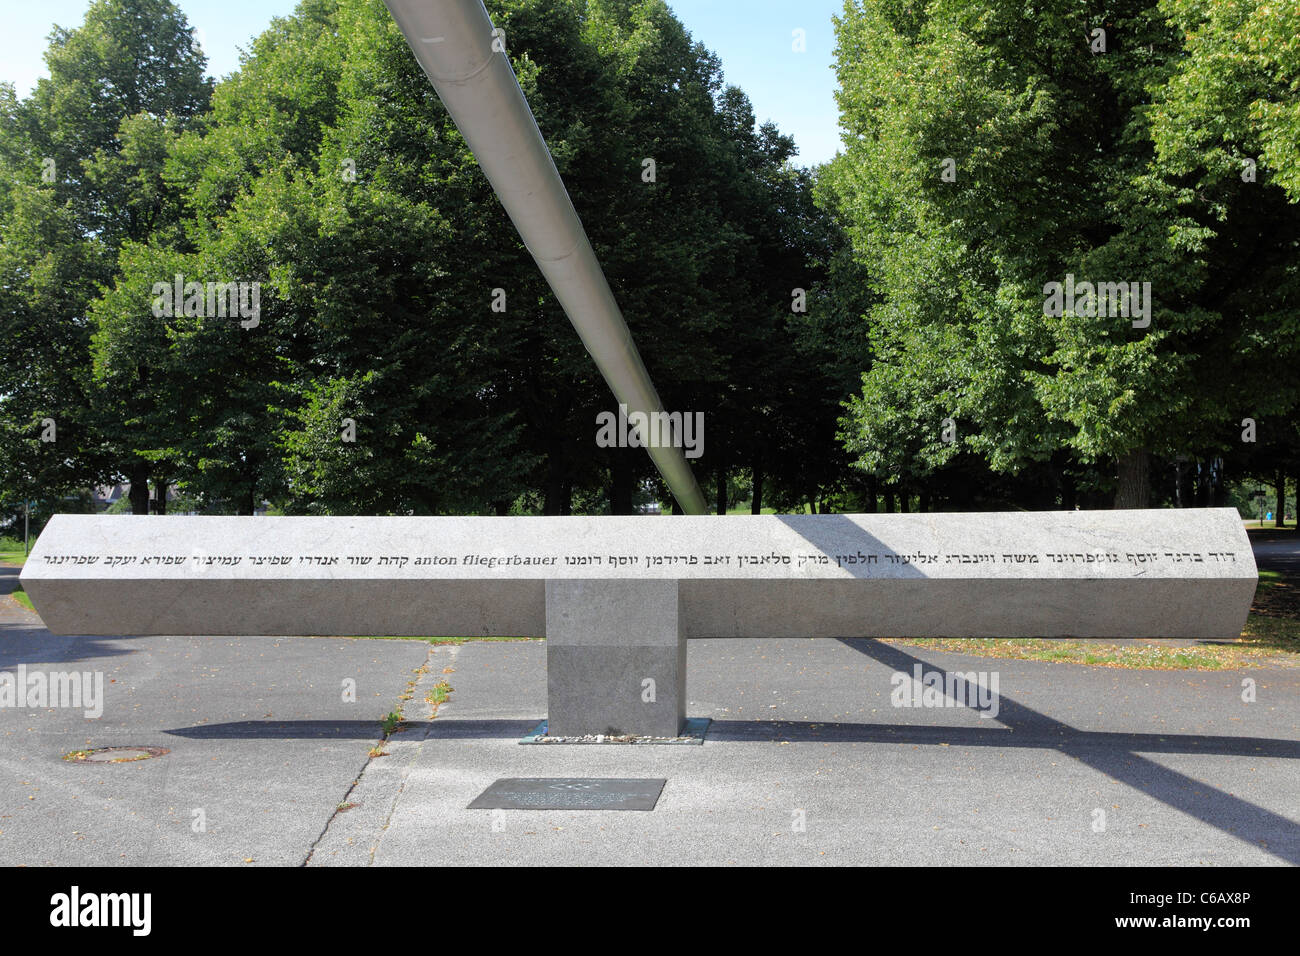 The memorial to the victims of the Munich Massacre of 1972, on the edge of the Olympic Park in Munich, Bavaria, Germany. Stock Photo